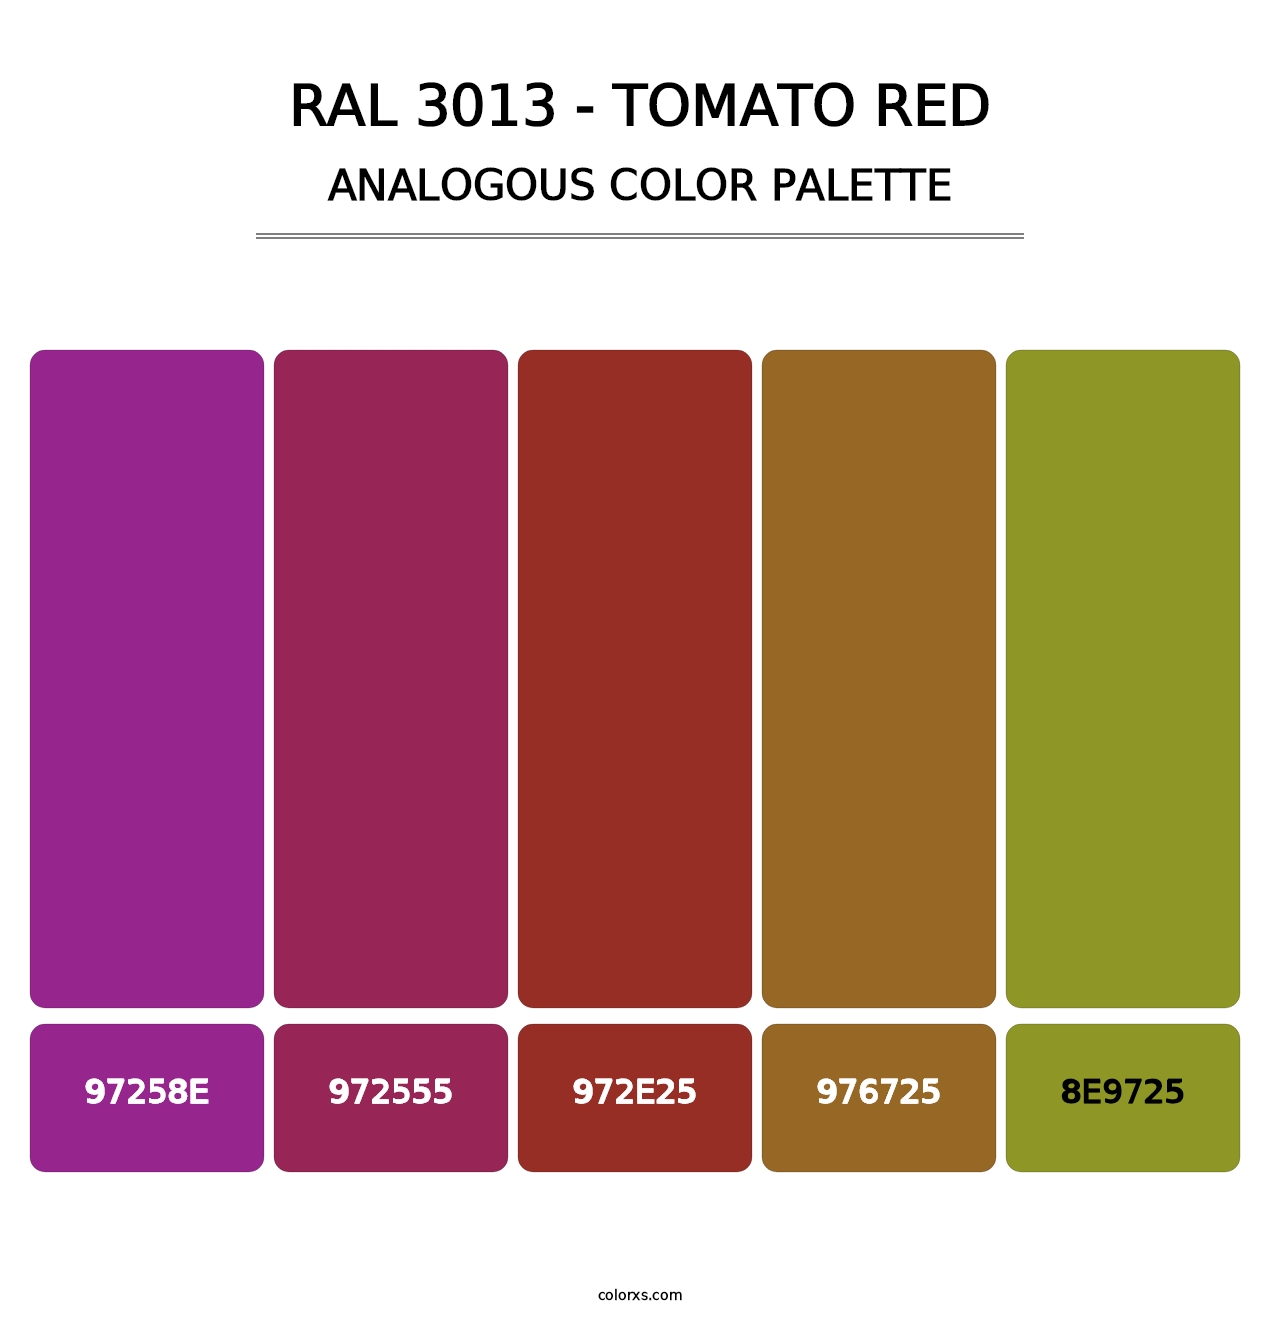 RAL 3013 - Tomato Red - Analogous Color Palette